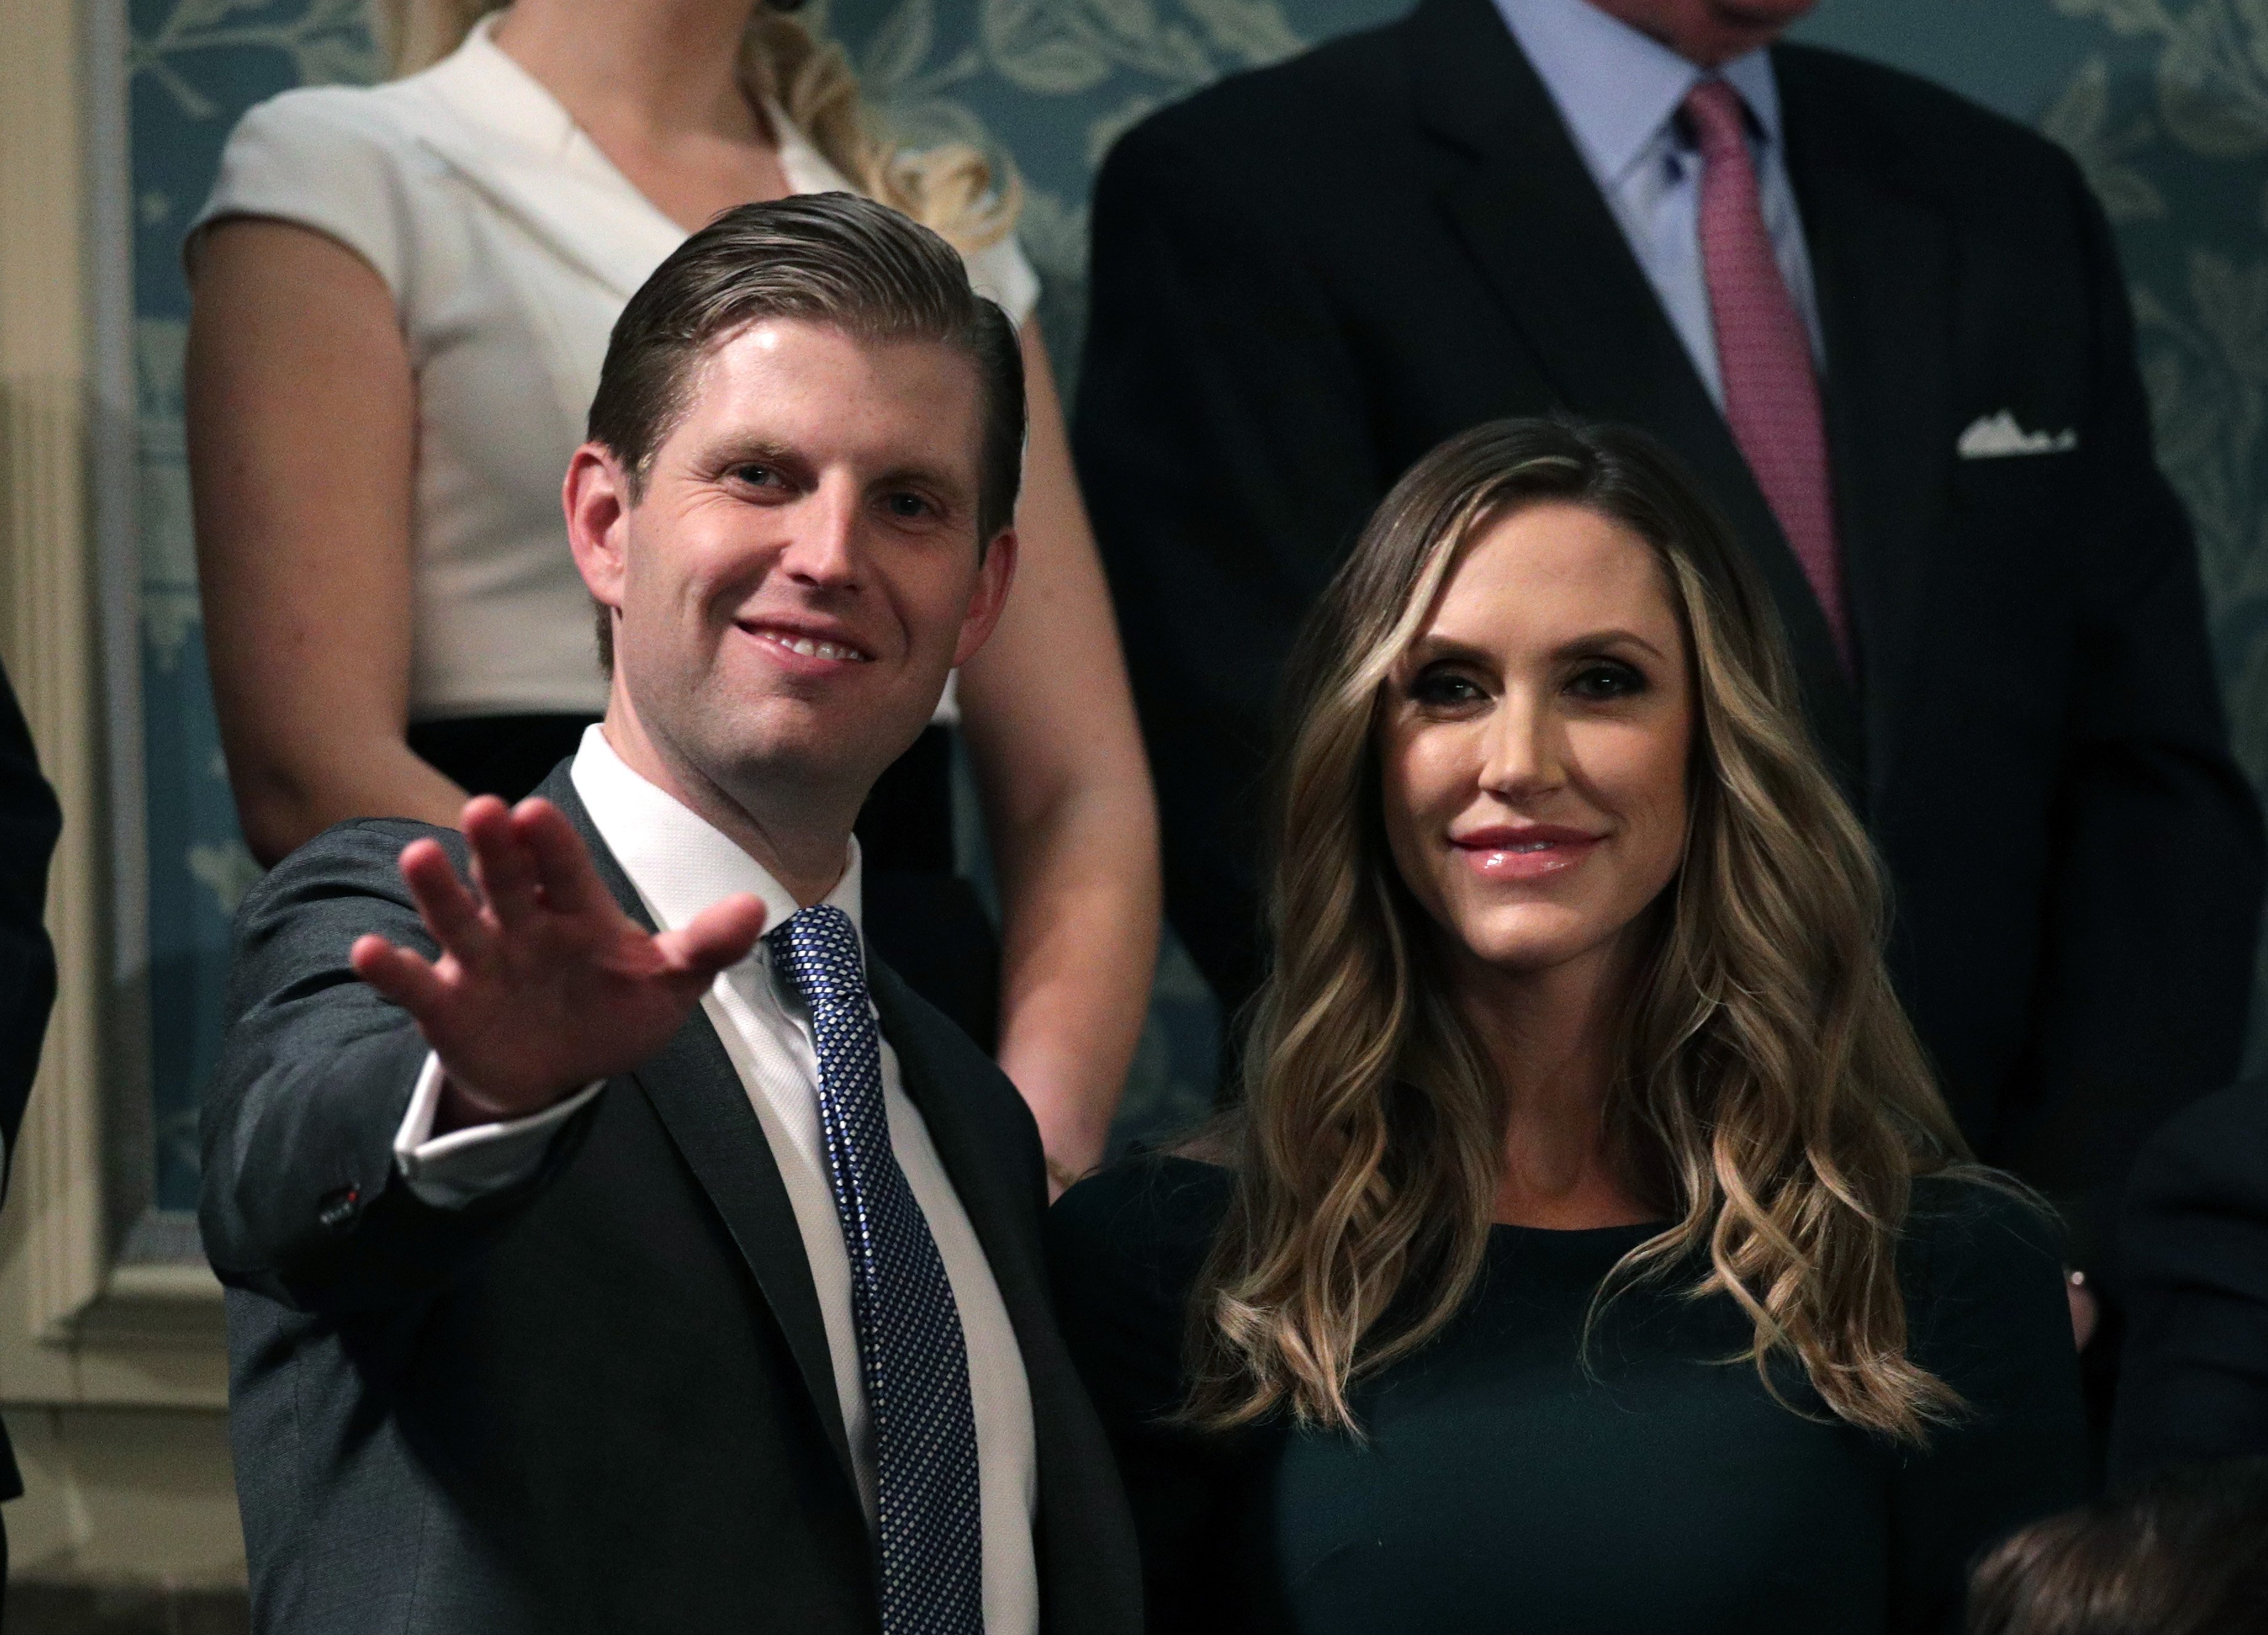 Eric Trump and Lara Trump attend the State of the Union address in the chamber of the U.S. House of Representatives January 30, 2018 in Washington, DC | Photo: GettyImages